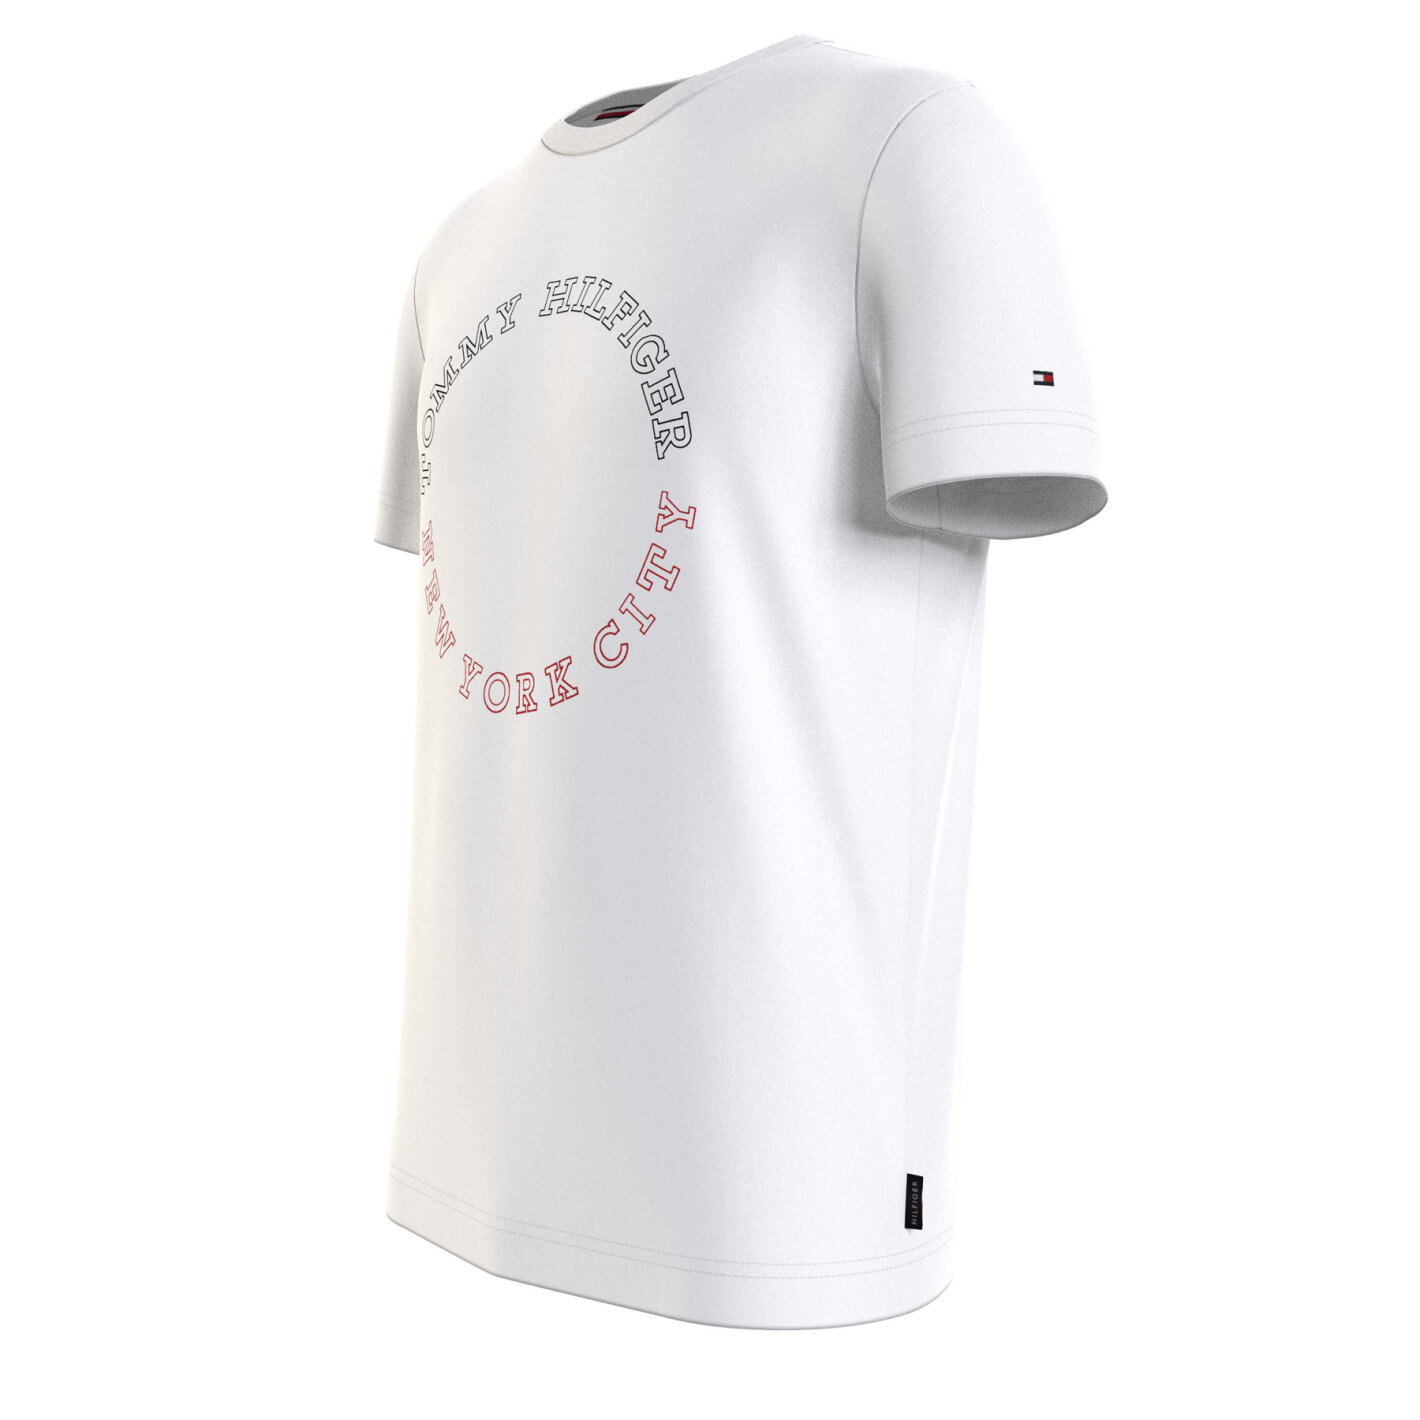 Tommy Hilfiger TH monotype roundle tee T-shirt White - Fri Fragt